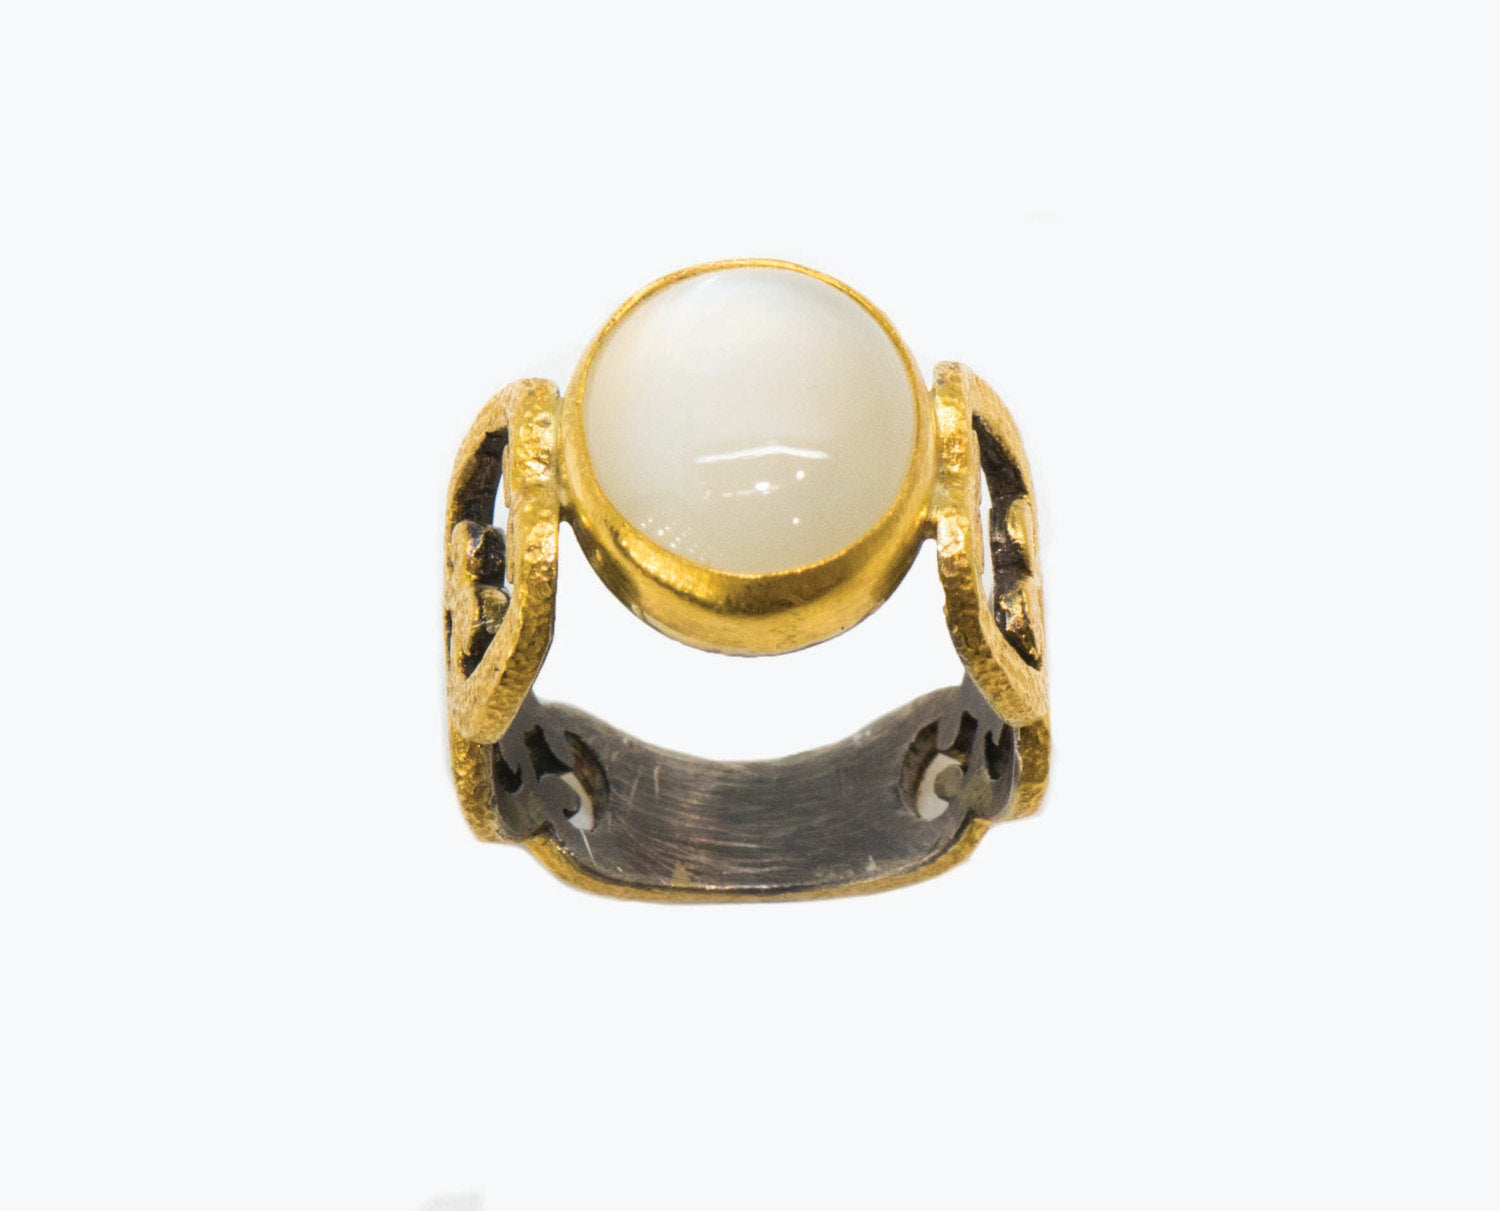 Buy 24K Gold Ring, Pure Gold 999.9, Solidly Hammered Men's Ring, Handmade,  Unique Design, Customizable and Personalizable Online in India - Etsy